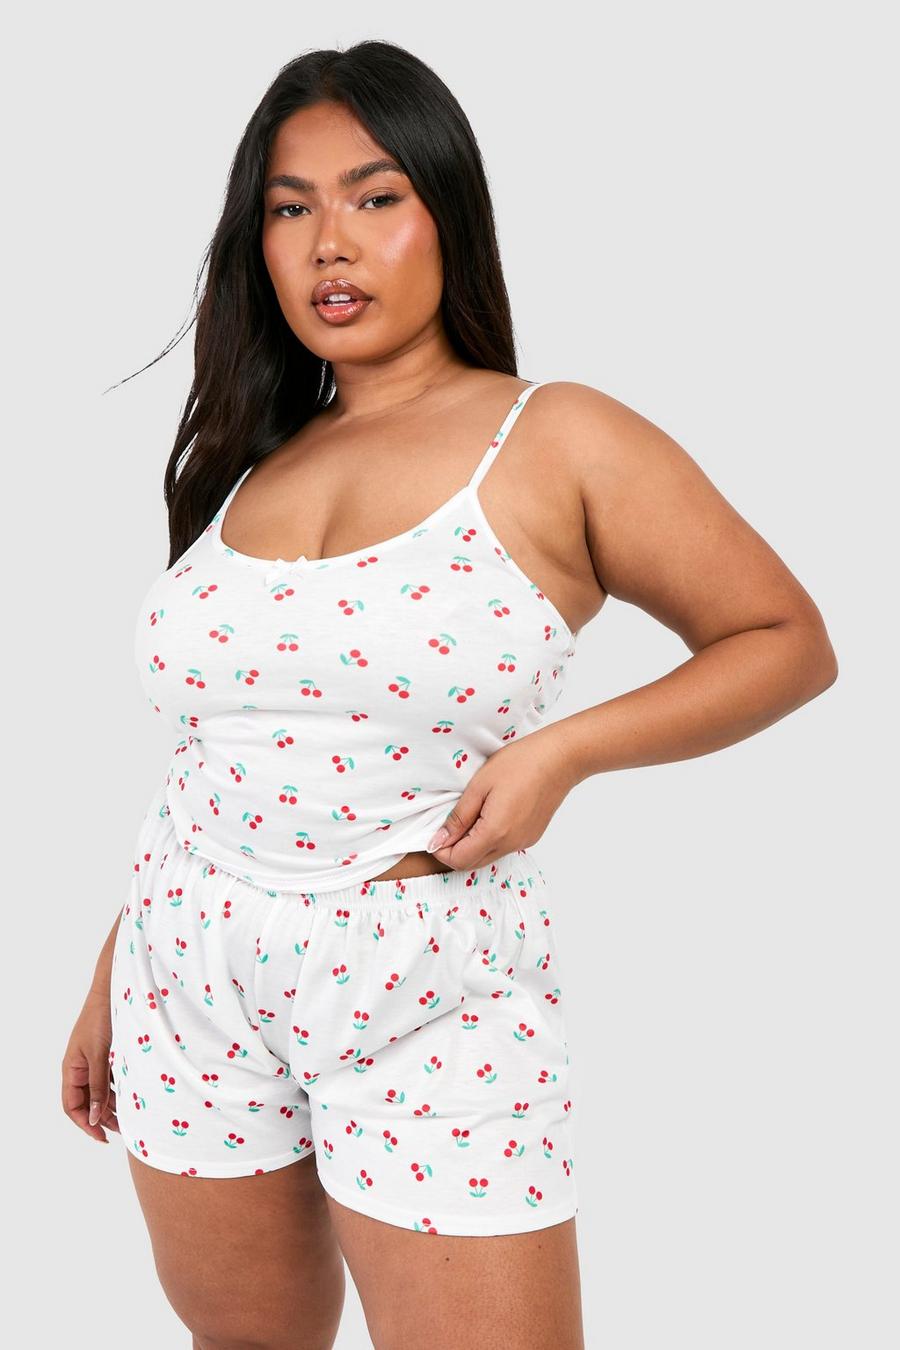 10 Cute Plus Size Pajama Sets Perfect For The Holidays - My Curves